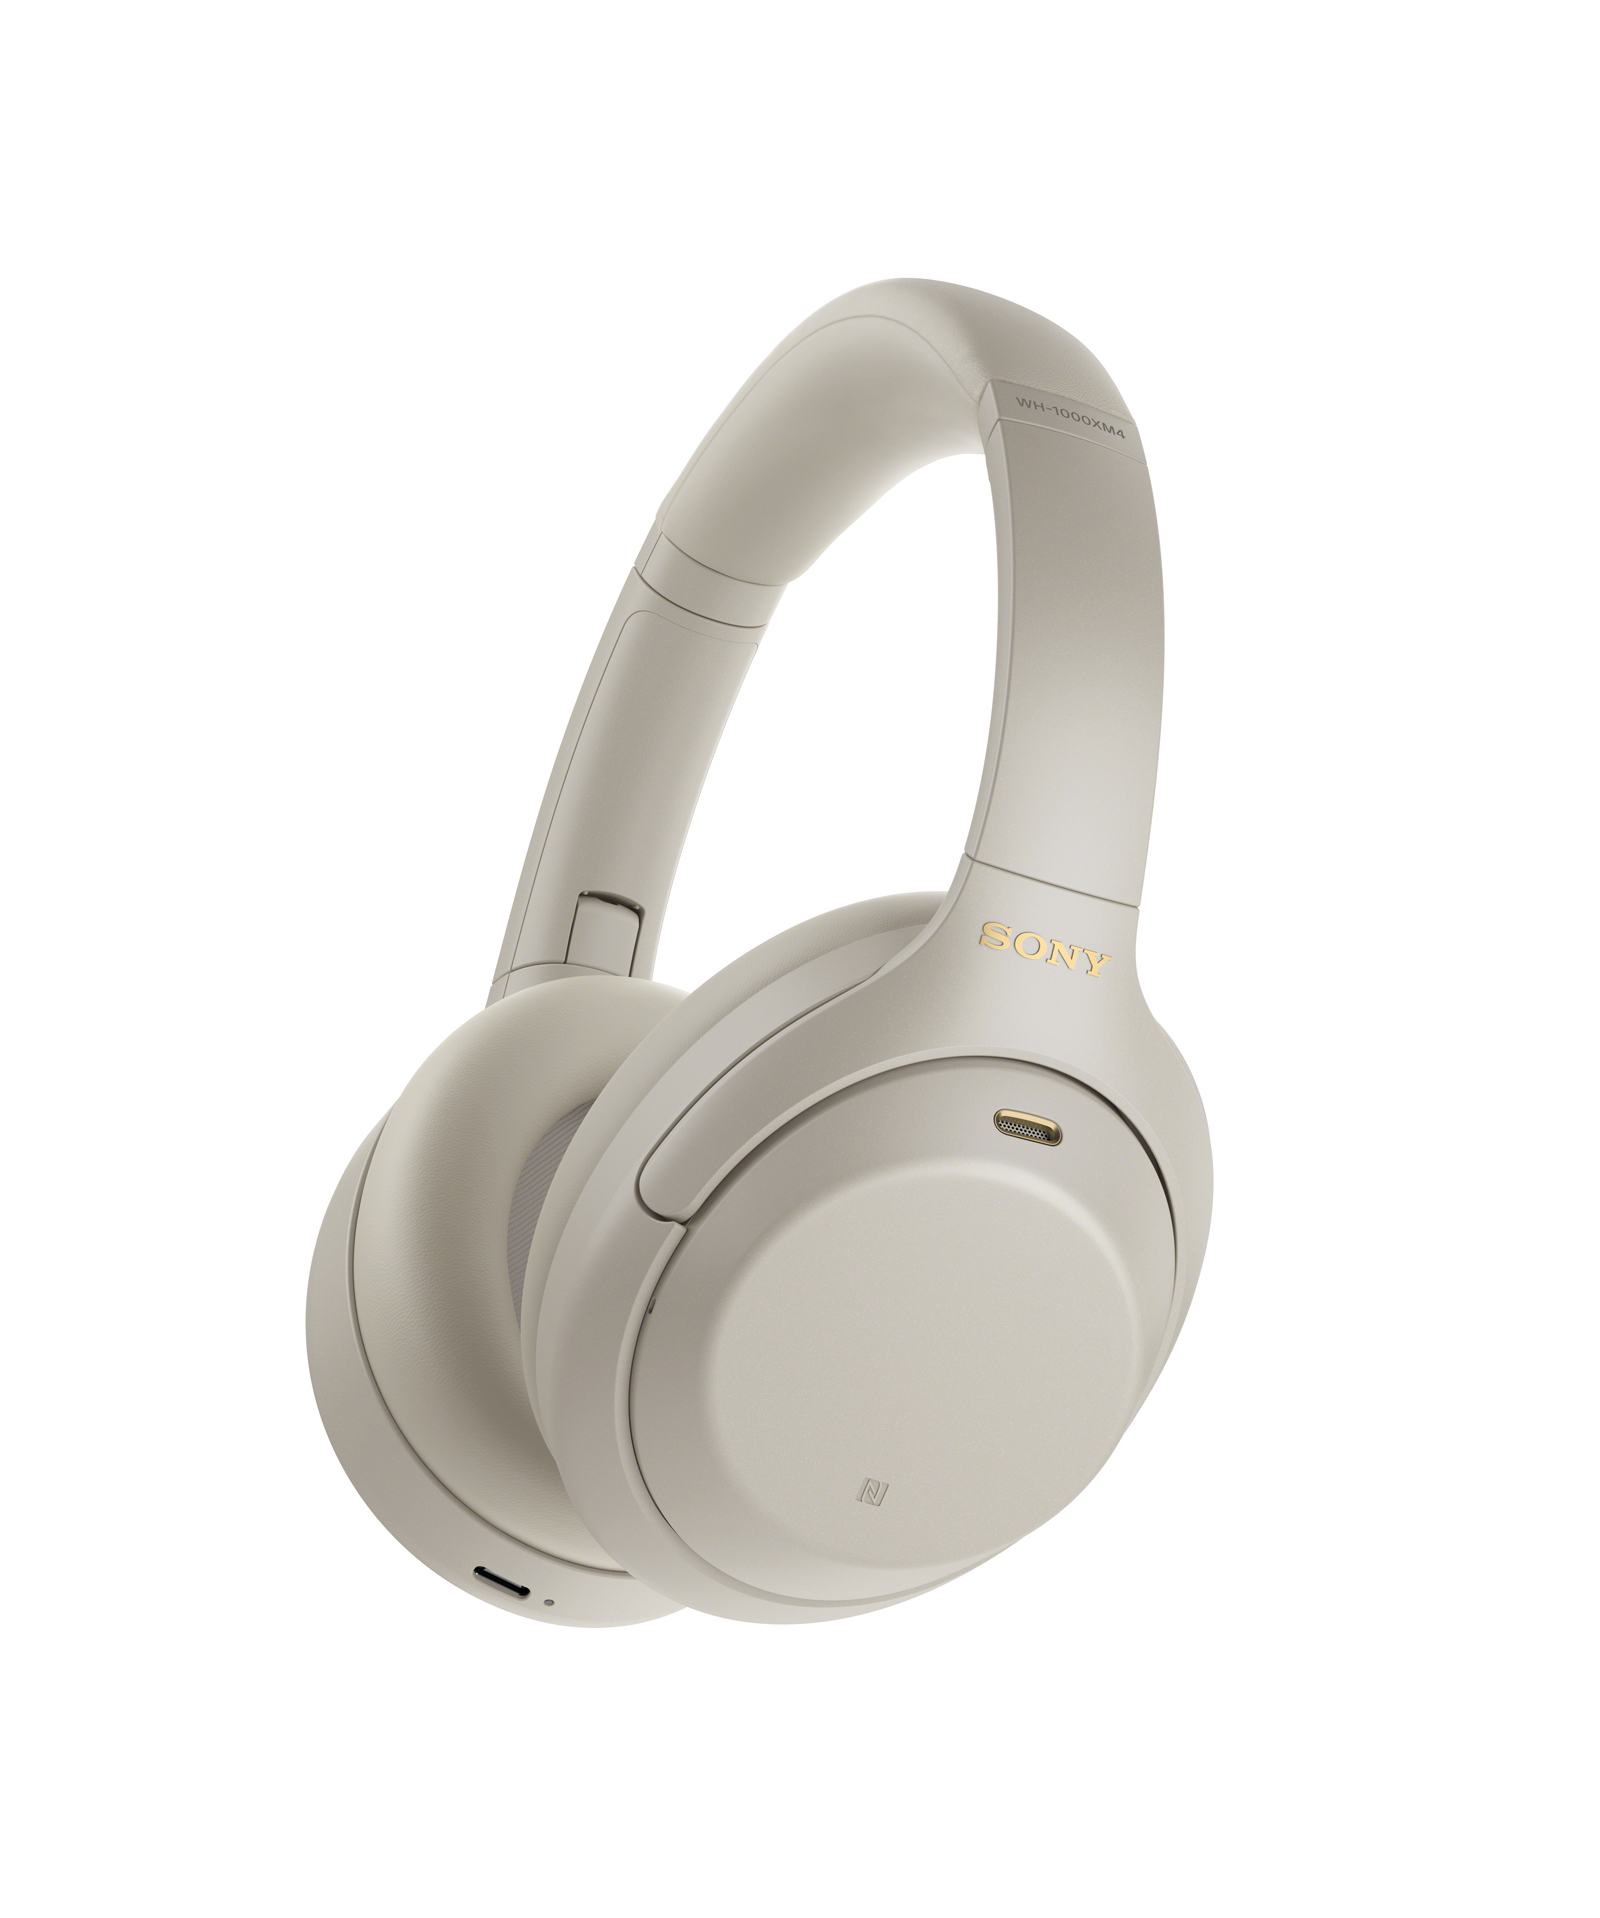 WH1000XM4S.CE7 SONY WH-1000XM4 - Headset - Head-band - Calls & Music - Silver - Binaural - Touch